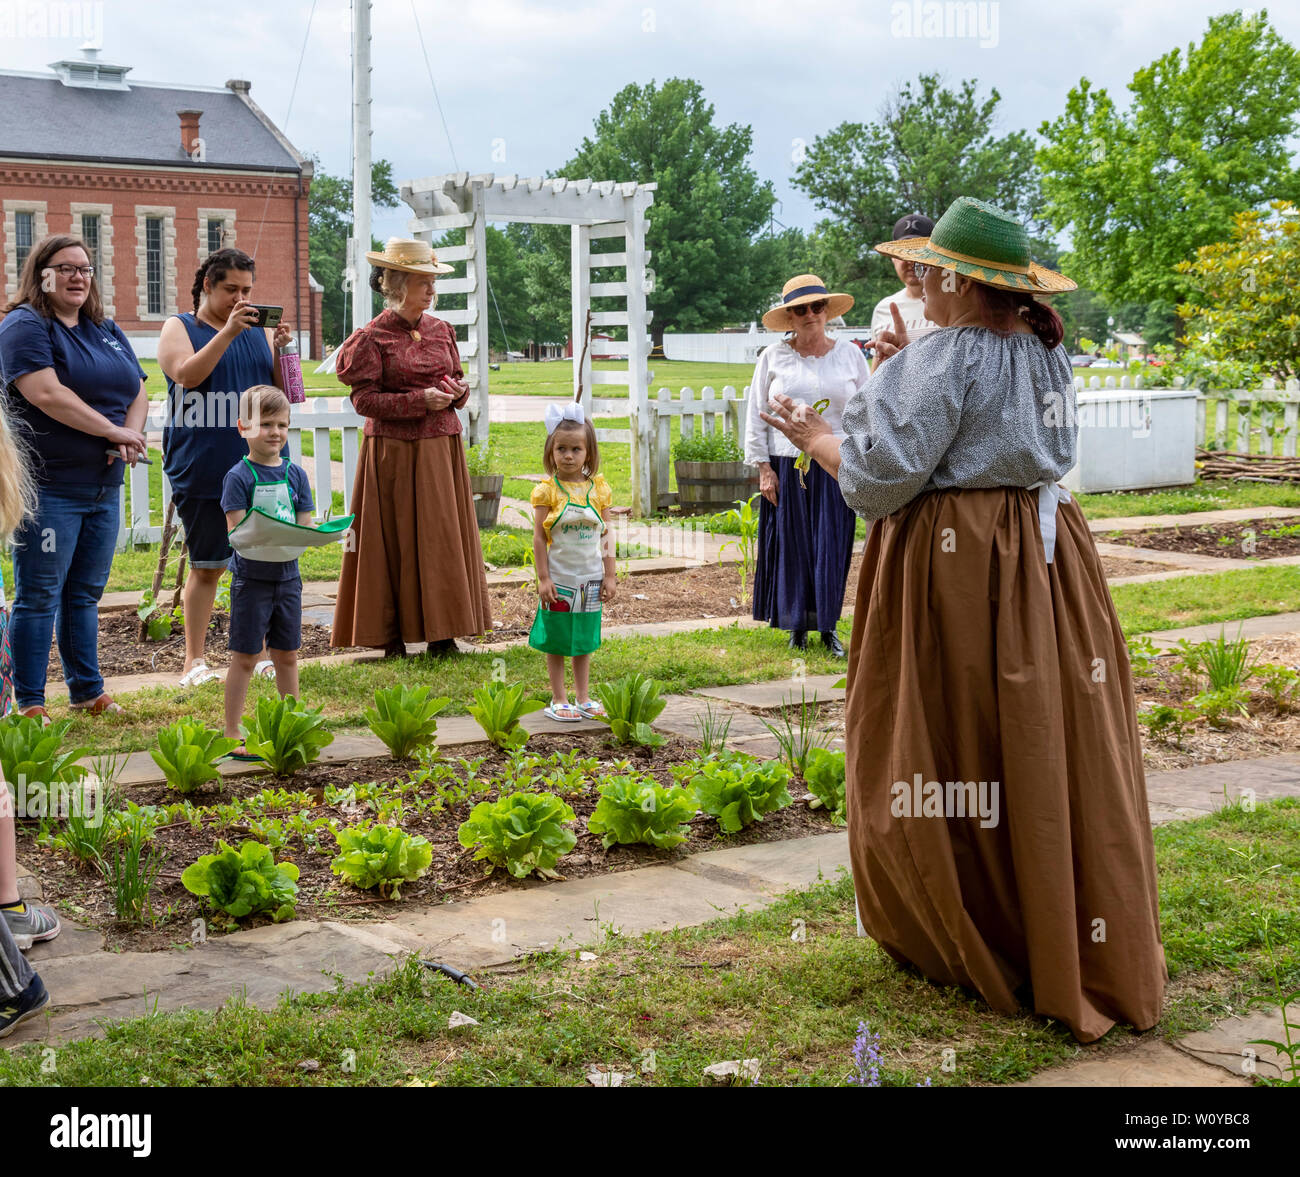 Fort Smith, Arkansas - The officers garden at Fort Smith National Historic Site. Volunteers from the River Valley Master Gardeners dress in period cos Stock Photo